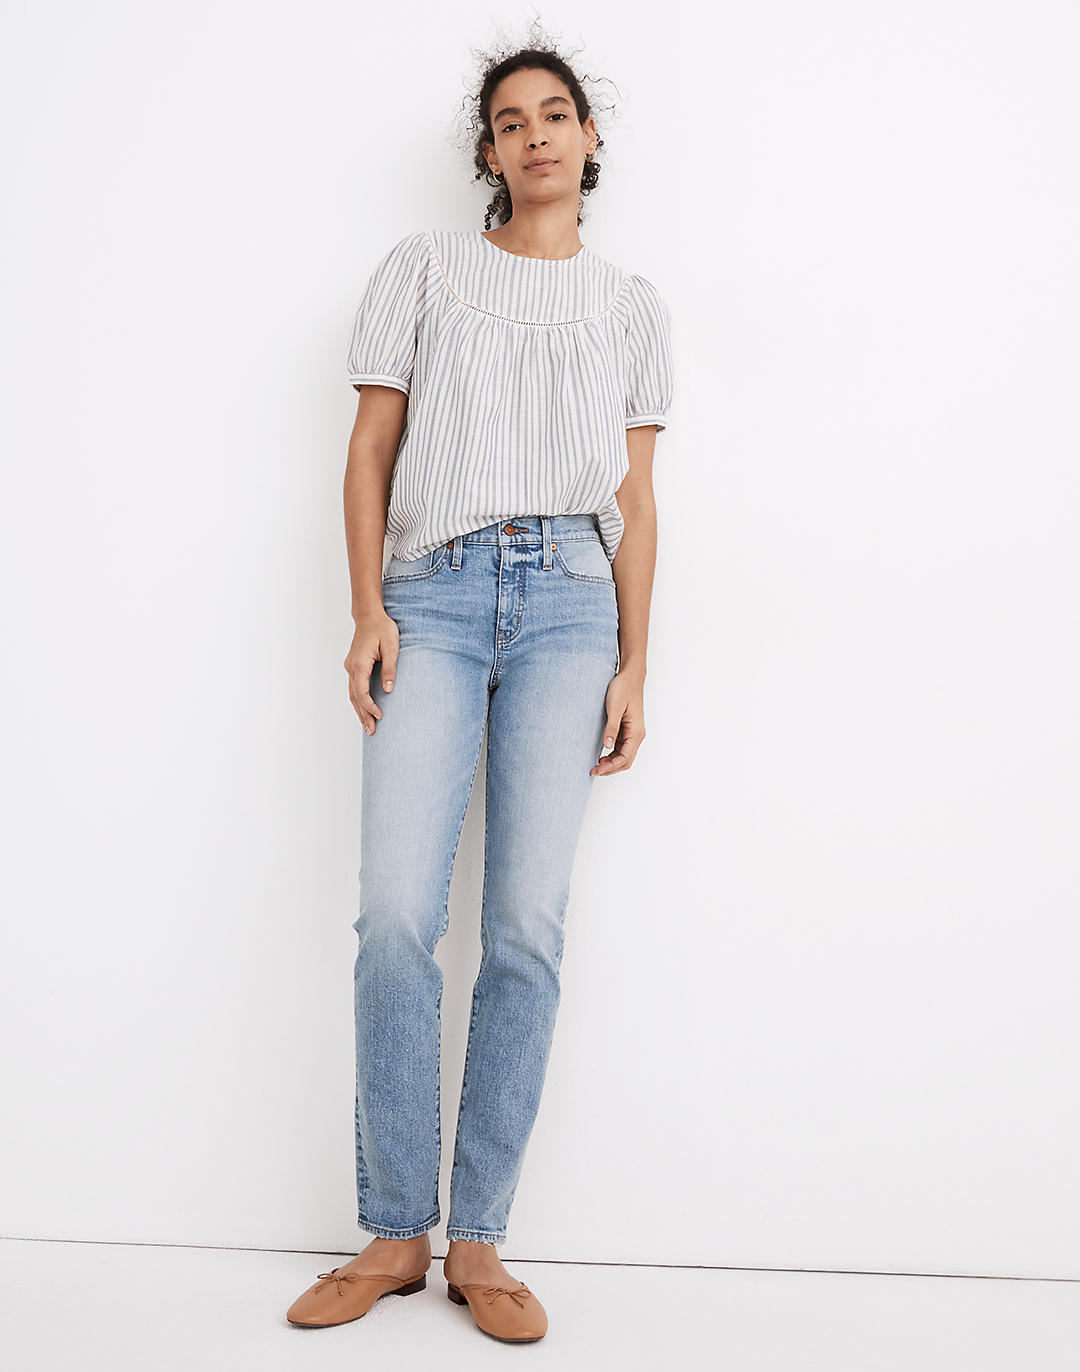 Tomboy Straight Jeans in Glover Wash in glover wash image 1